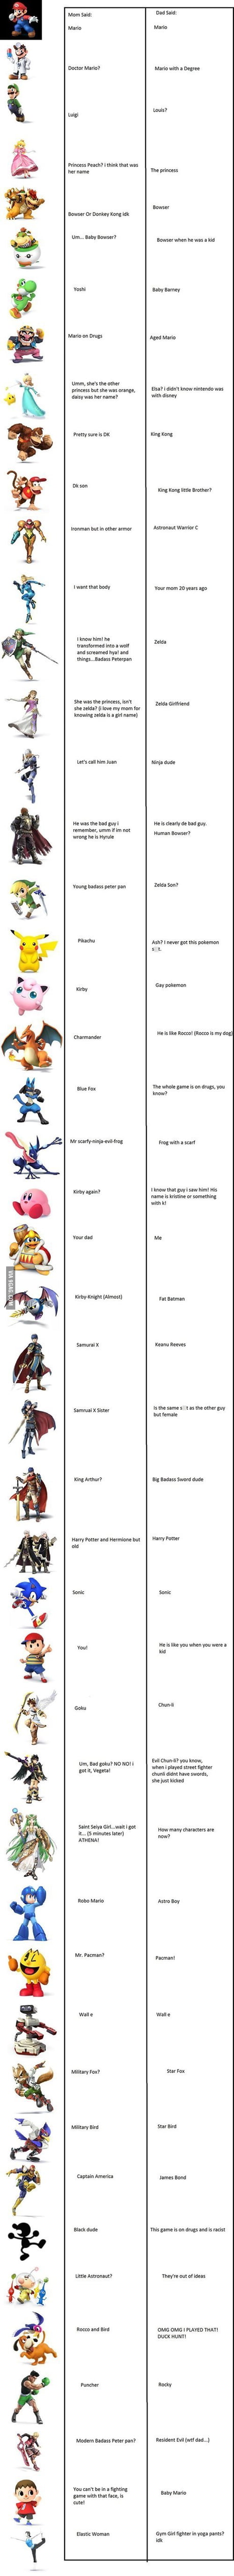 popular video game character names